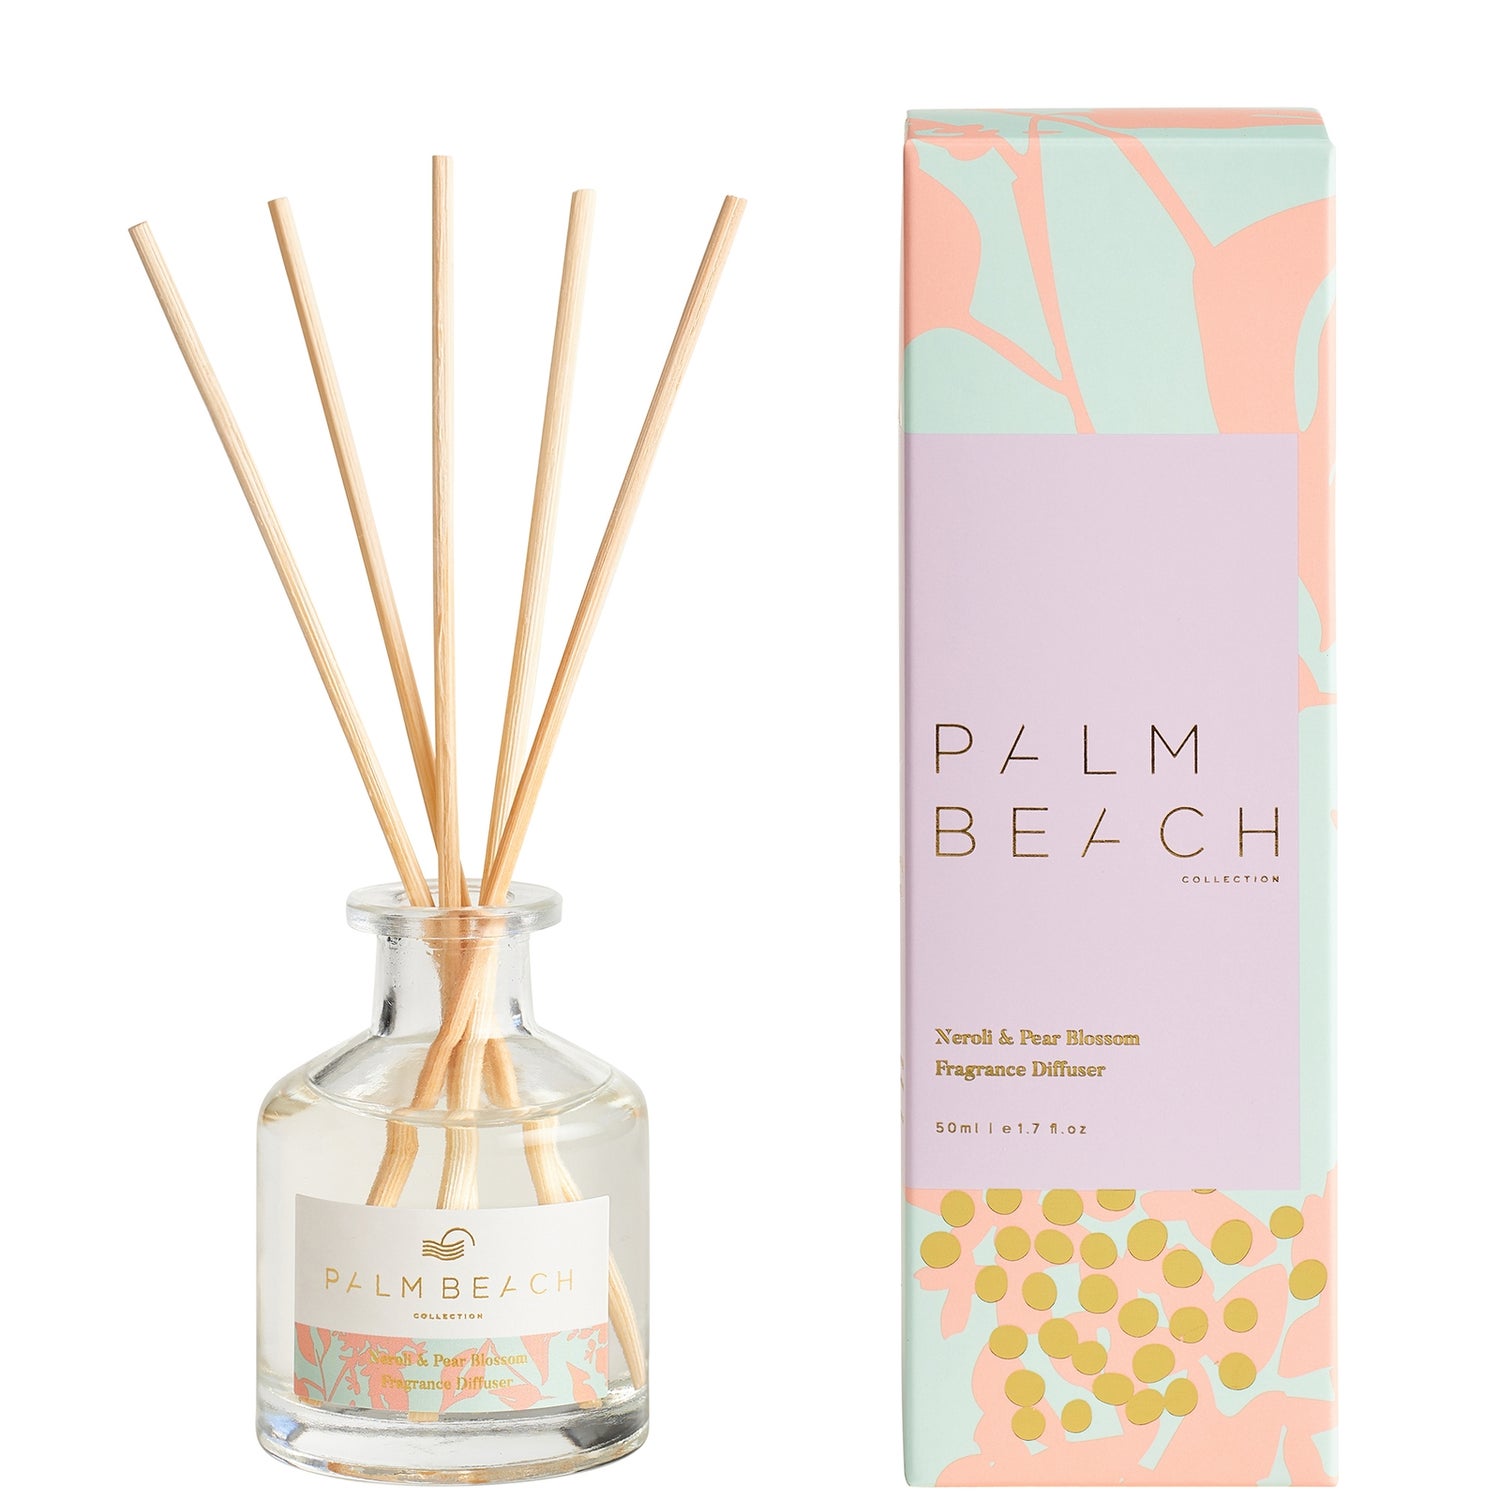 Palm Beach Collection Limited Edition Neroli and Pear Blossom Mini Fragrance Diffuser 50ml